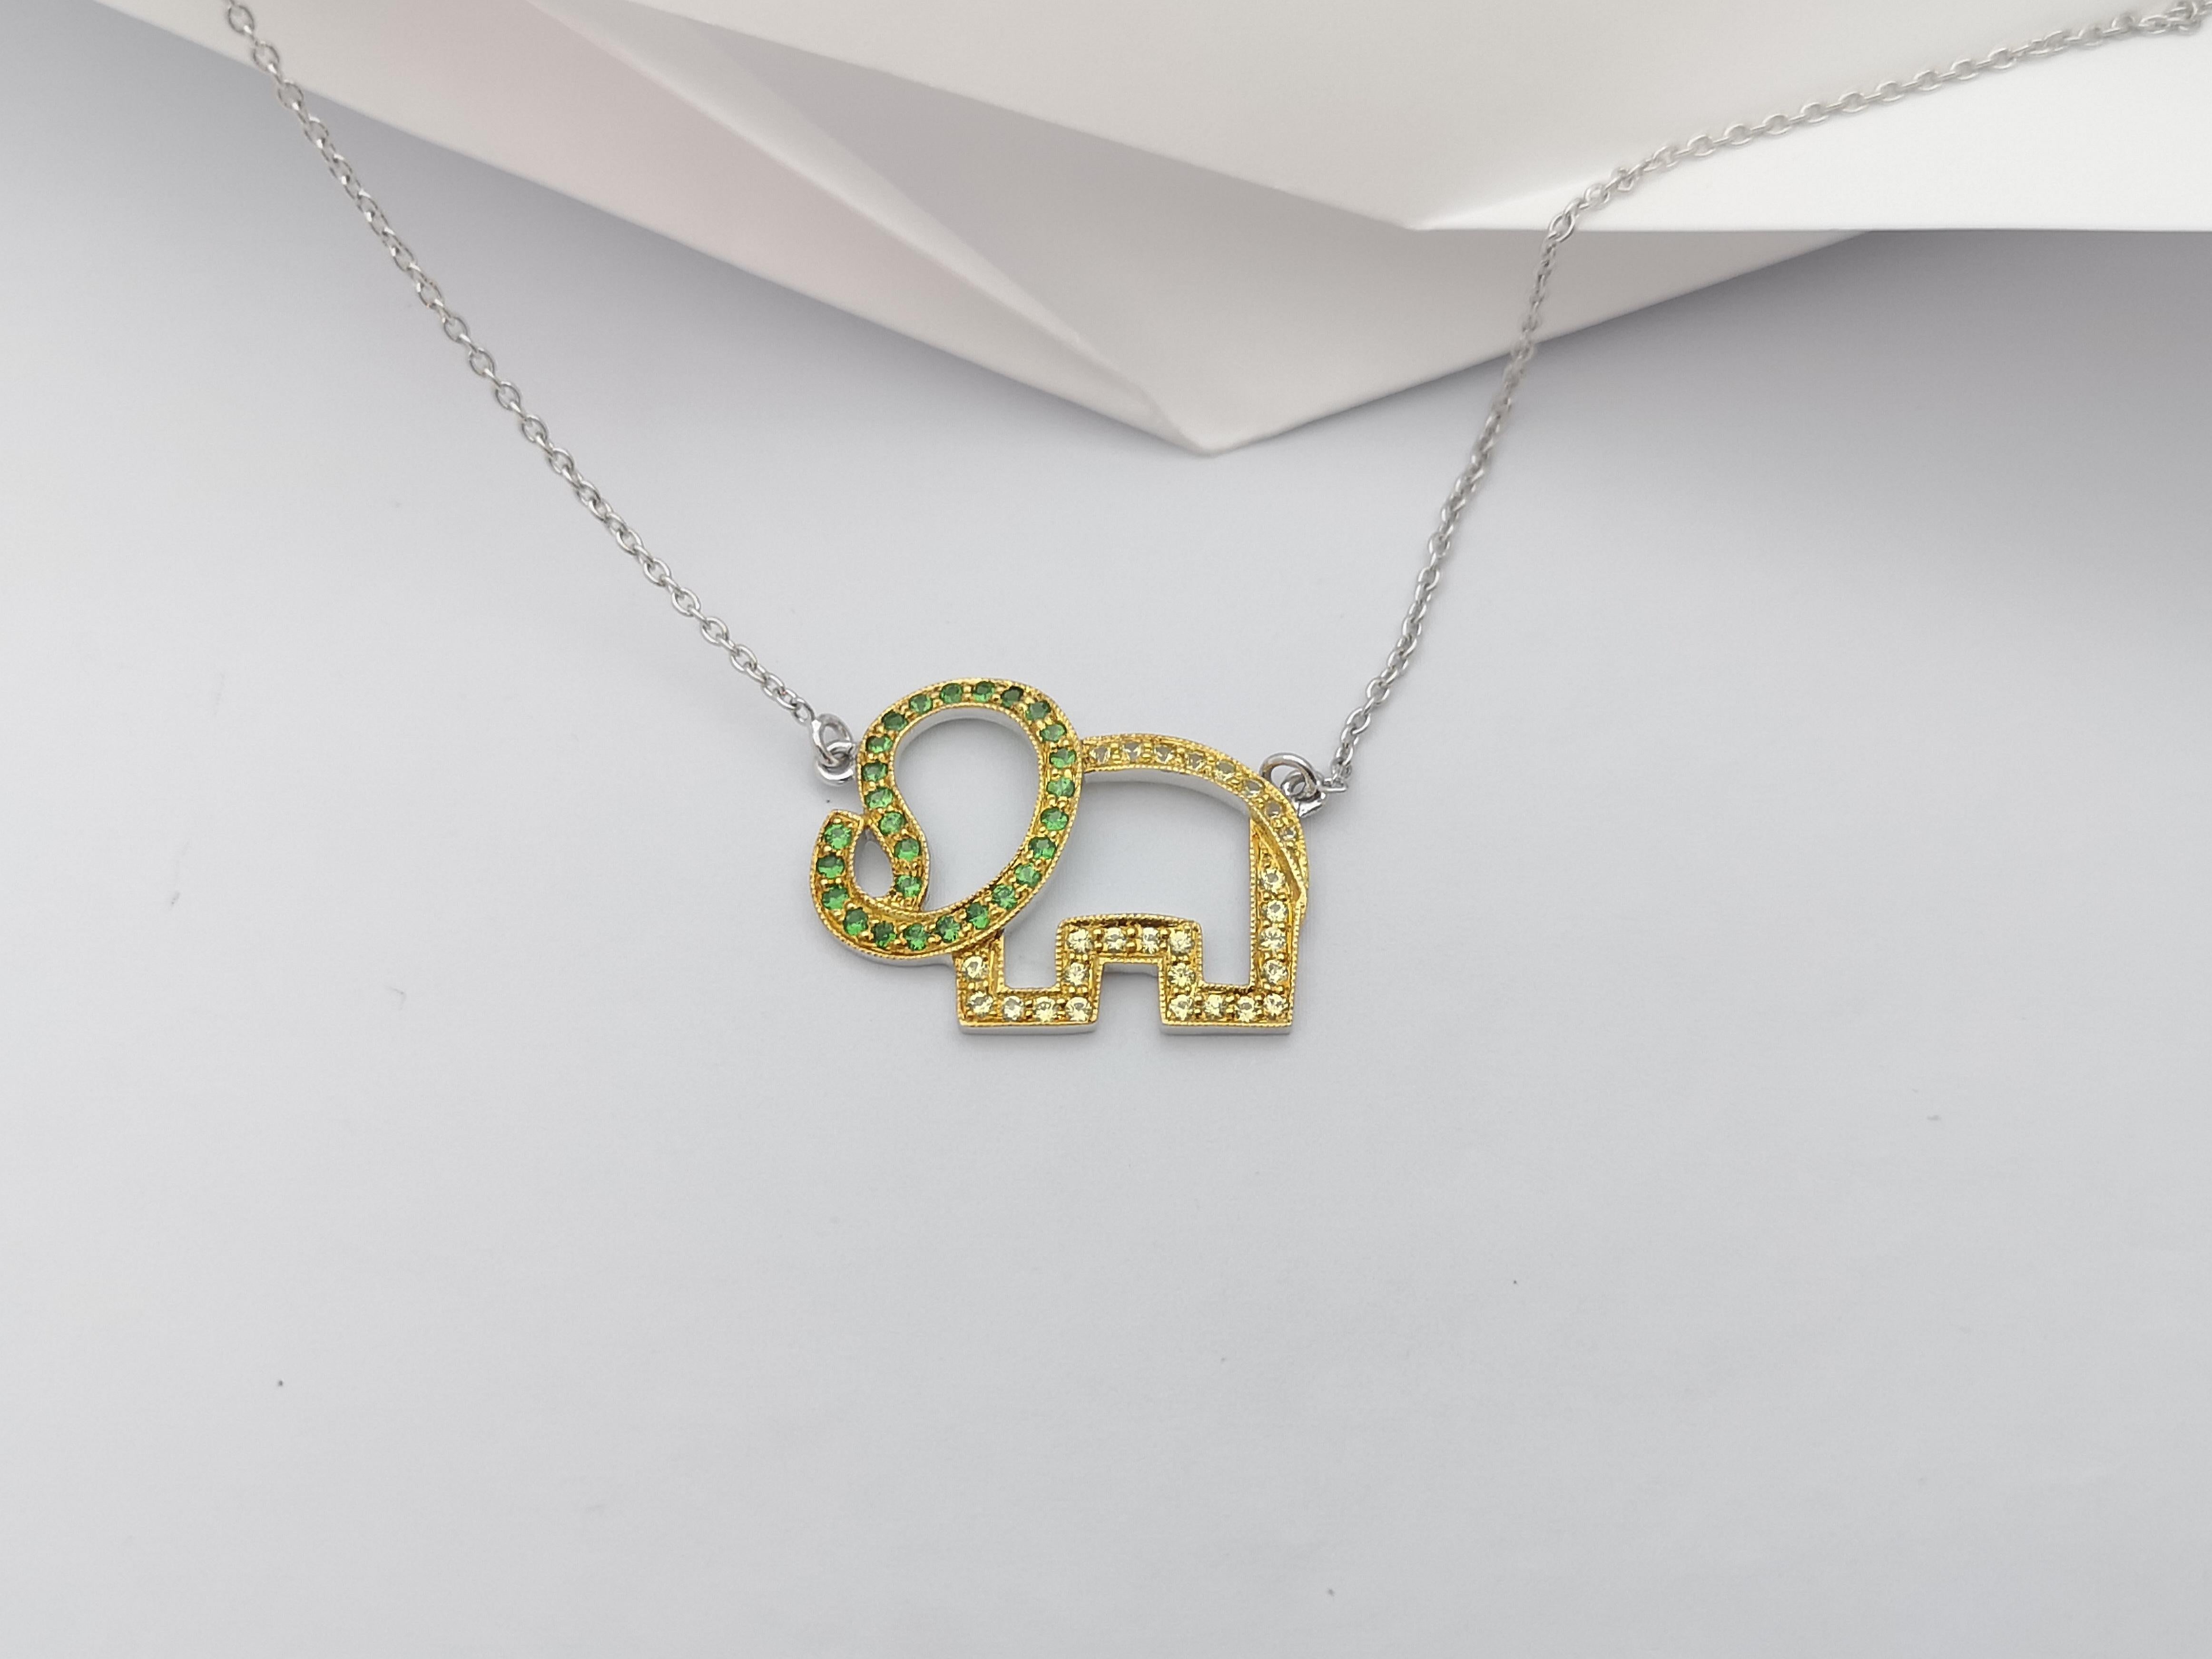 Brilliant Cut Tsavorite and Yellow Sapphire Elephant Necklace set in Silver Settings For Sale